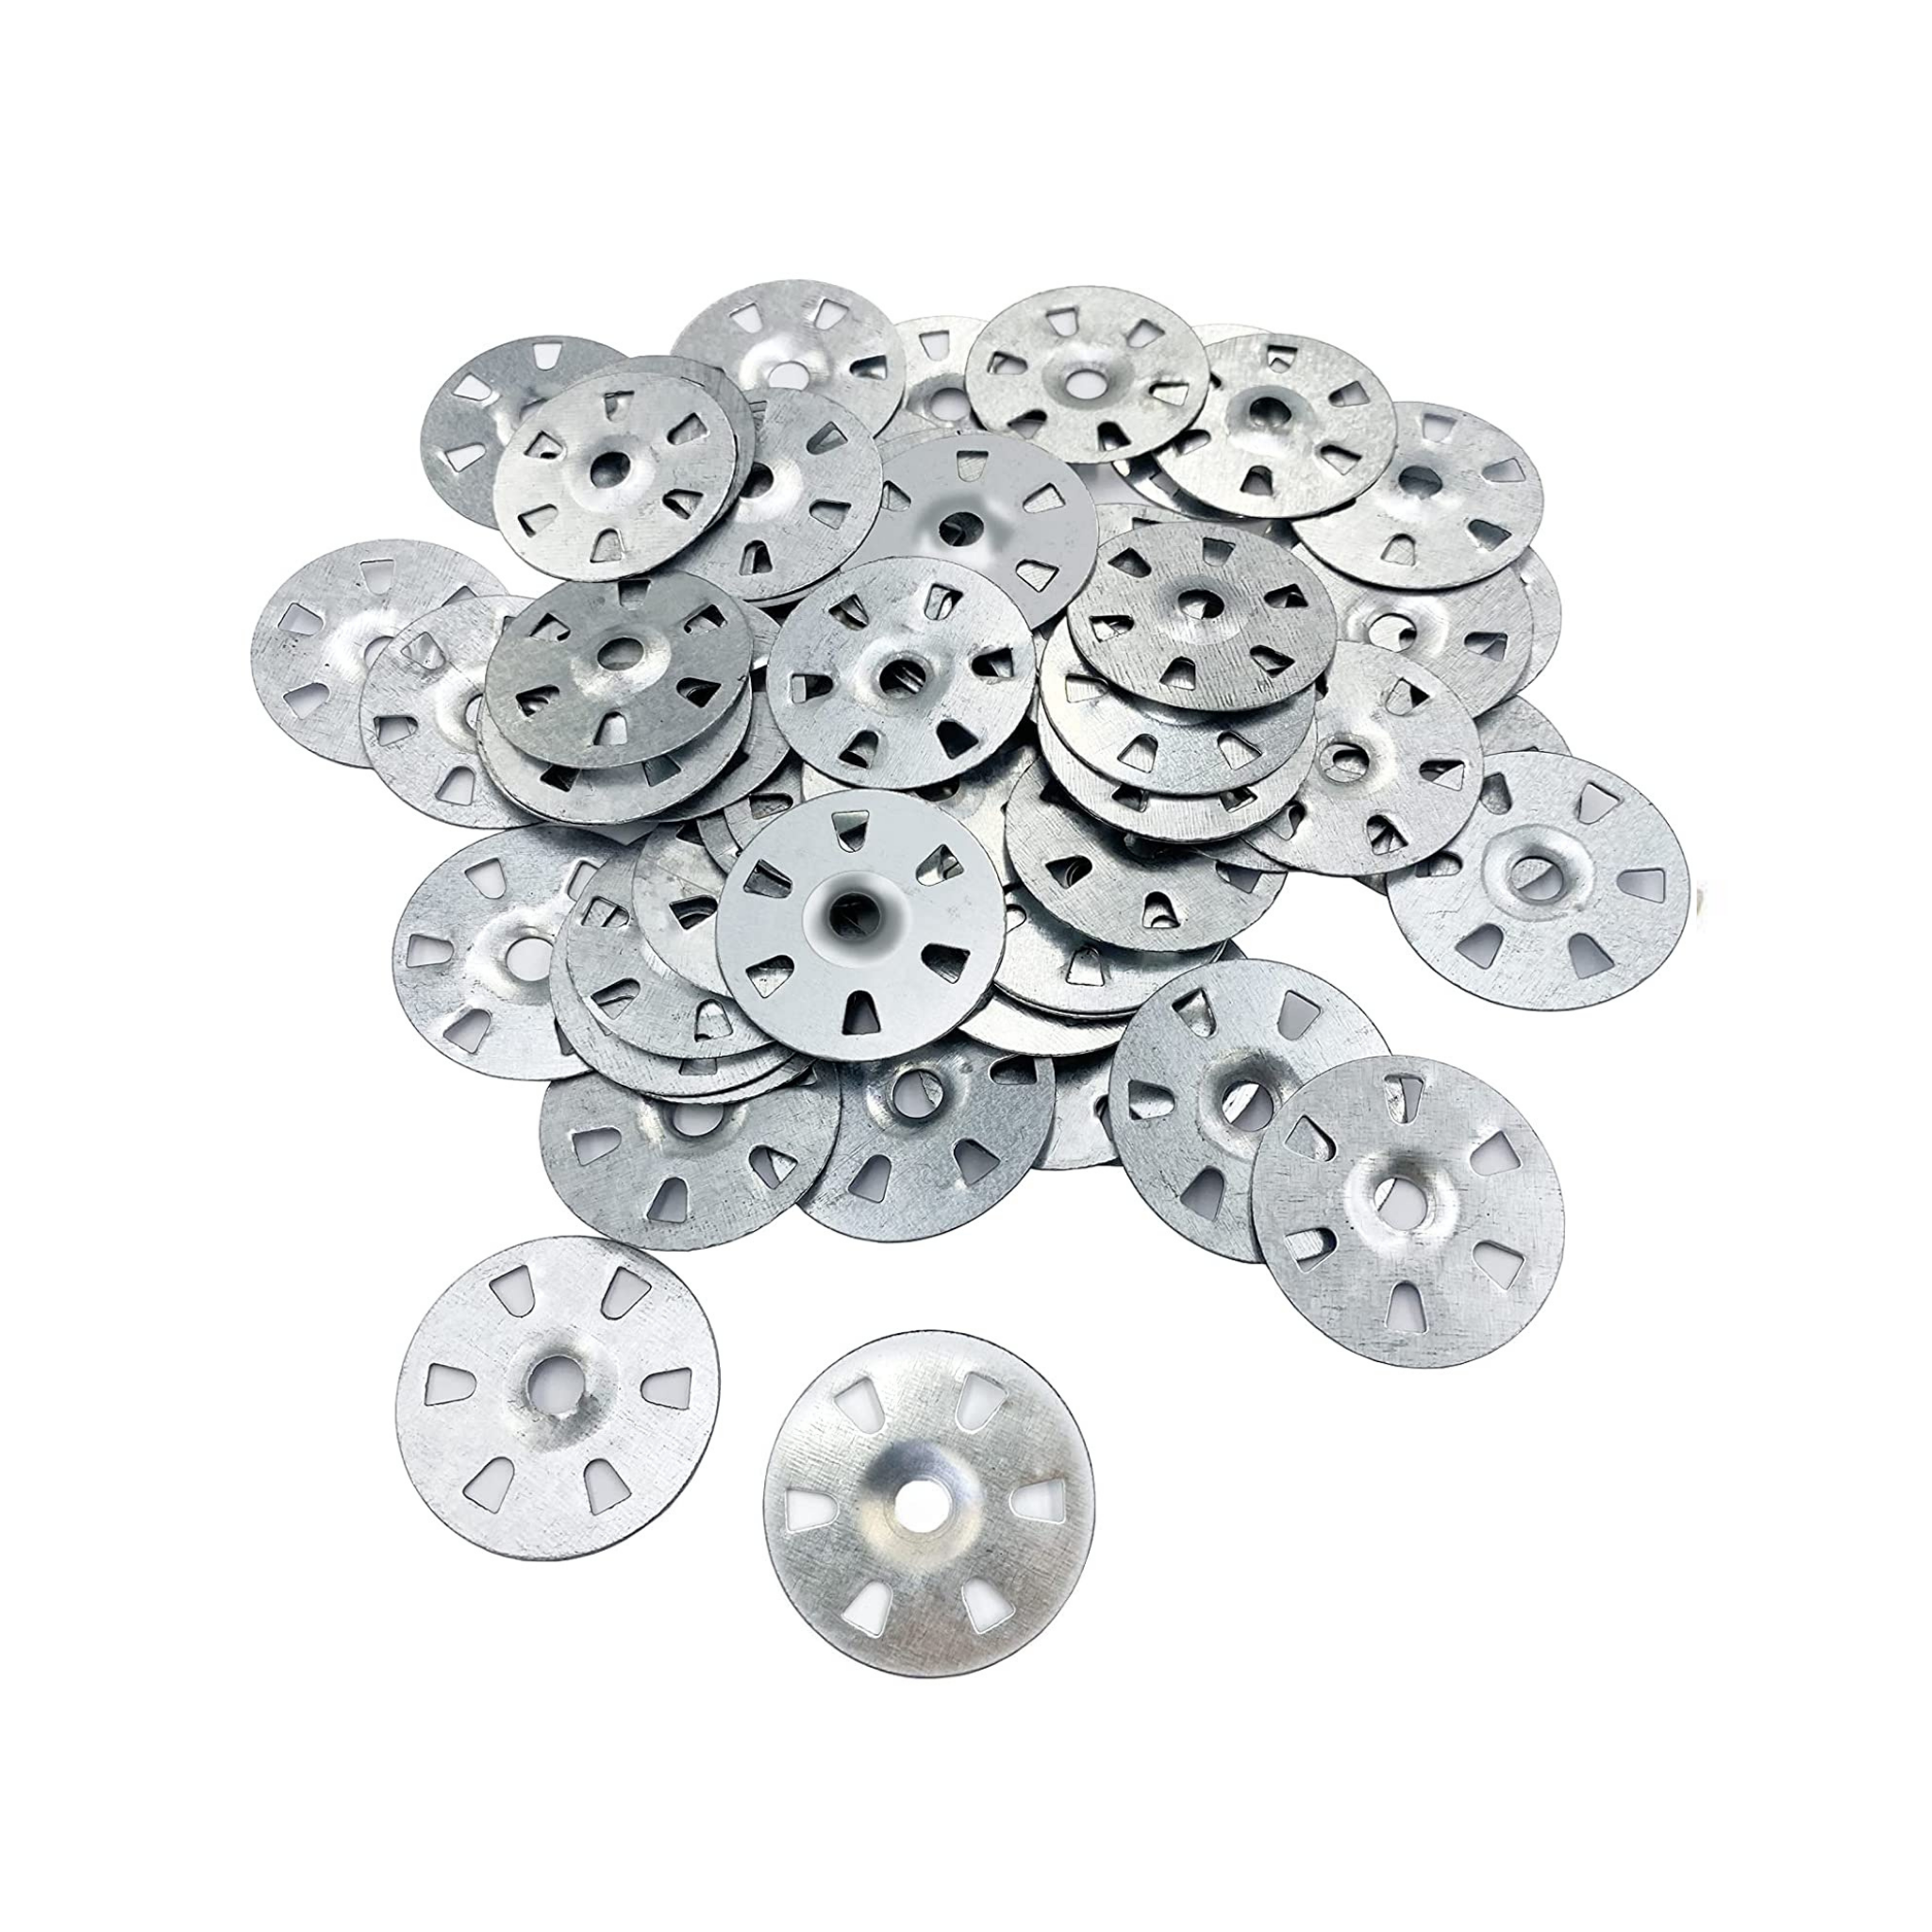 Stainless Steel Washers 35mm 100 pieces